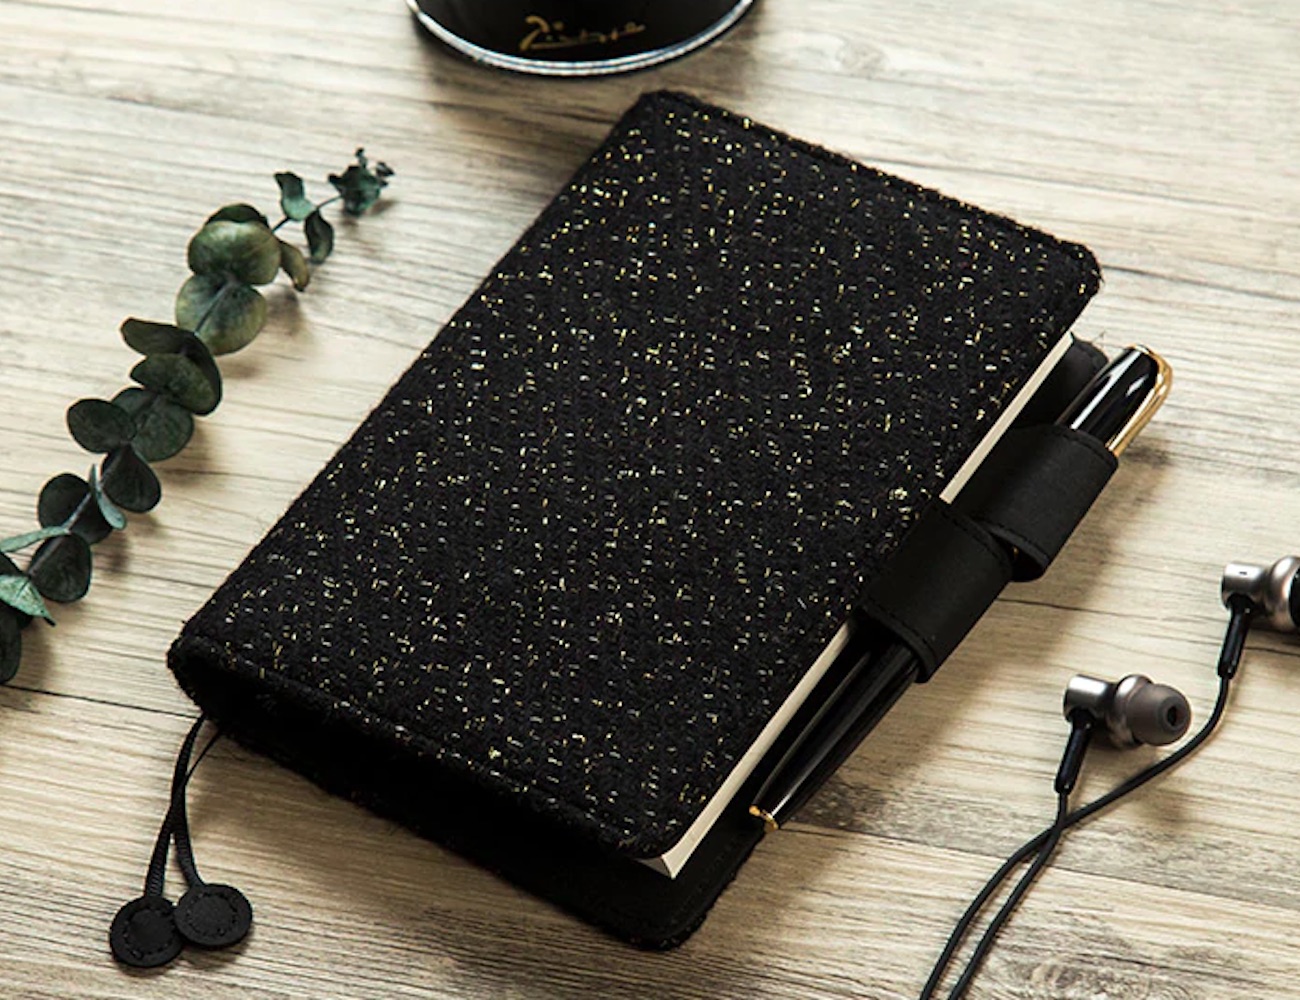 Black Wool Hardcover Notebook Cover offers a fresh look for your ideas